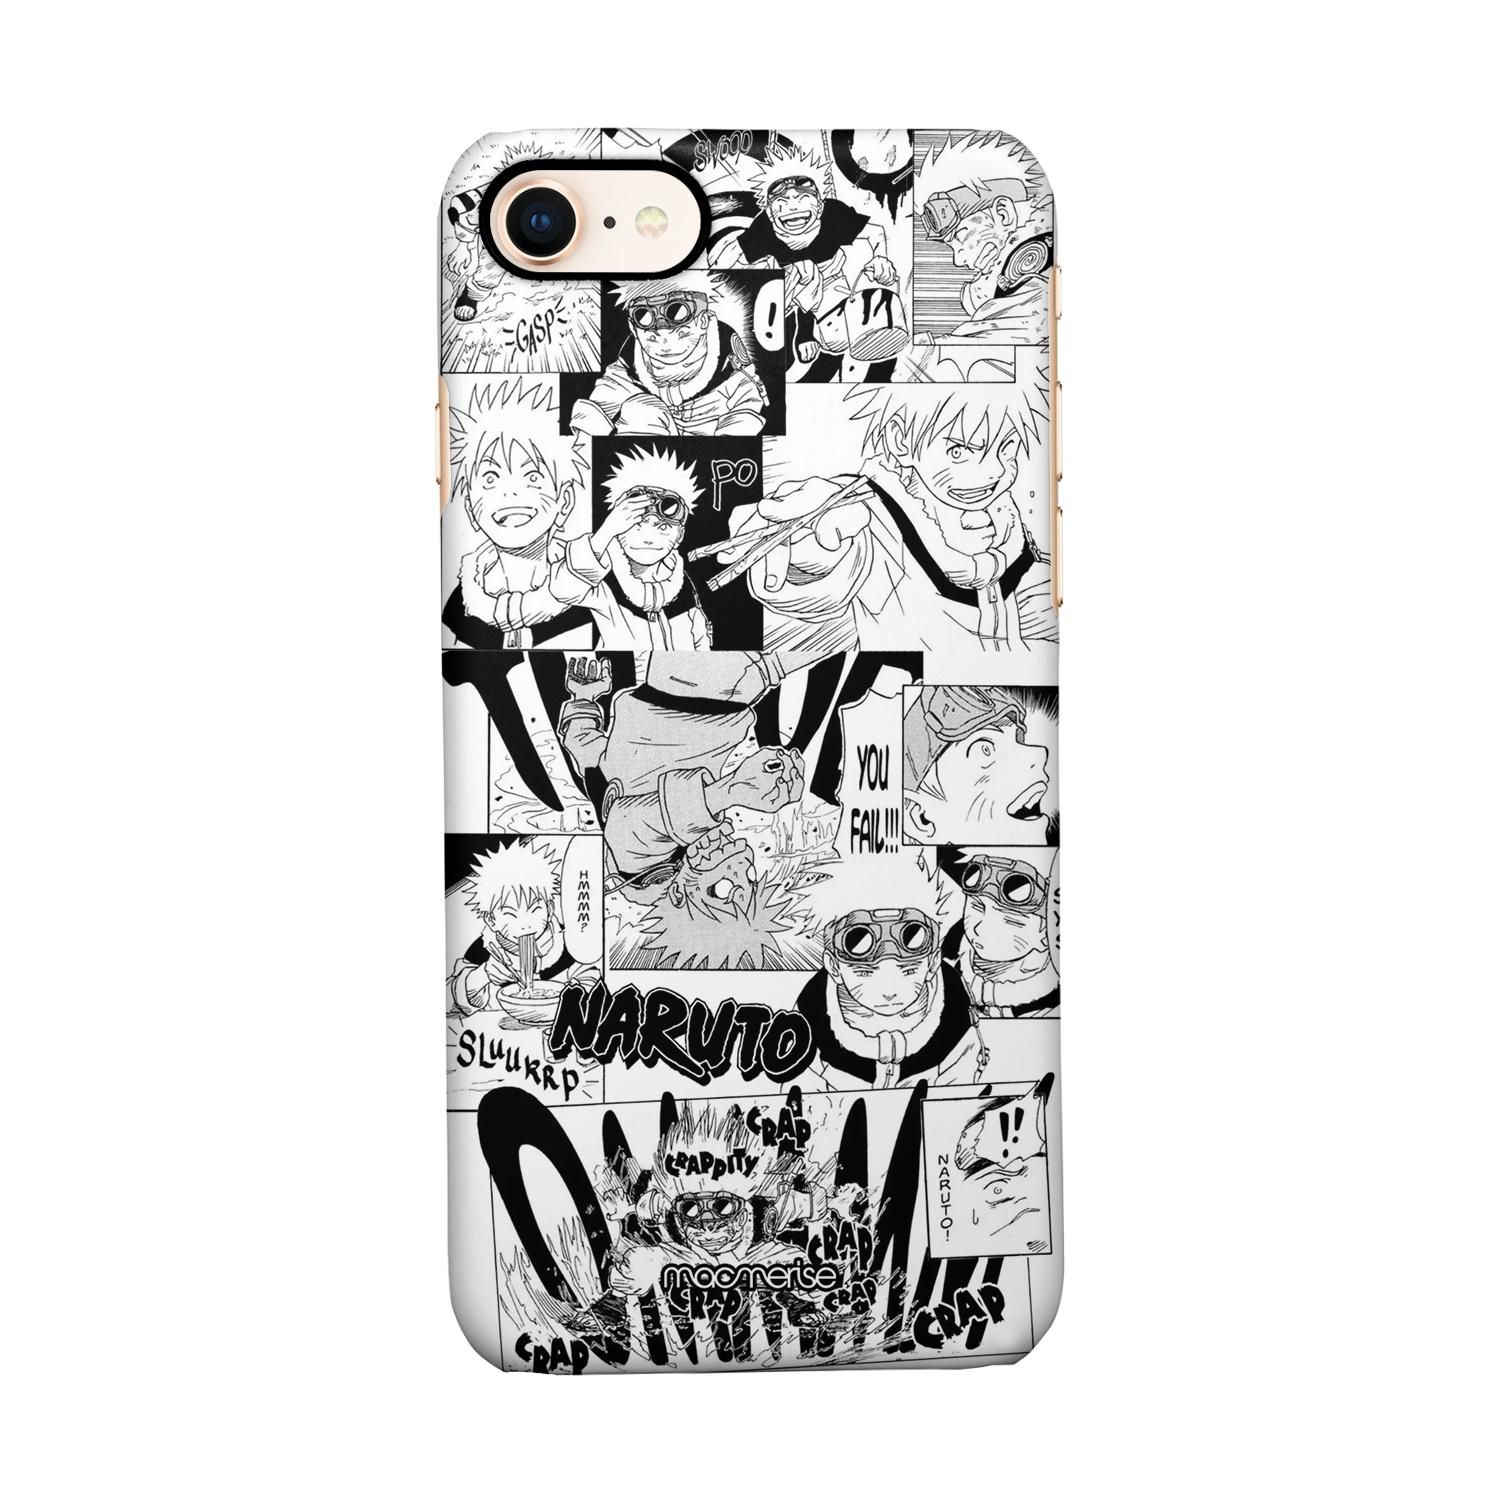 Buy Naruto Collage - Sleek Phone Case for iPhone 7 Online